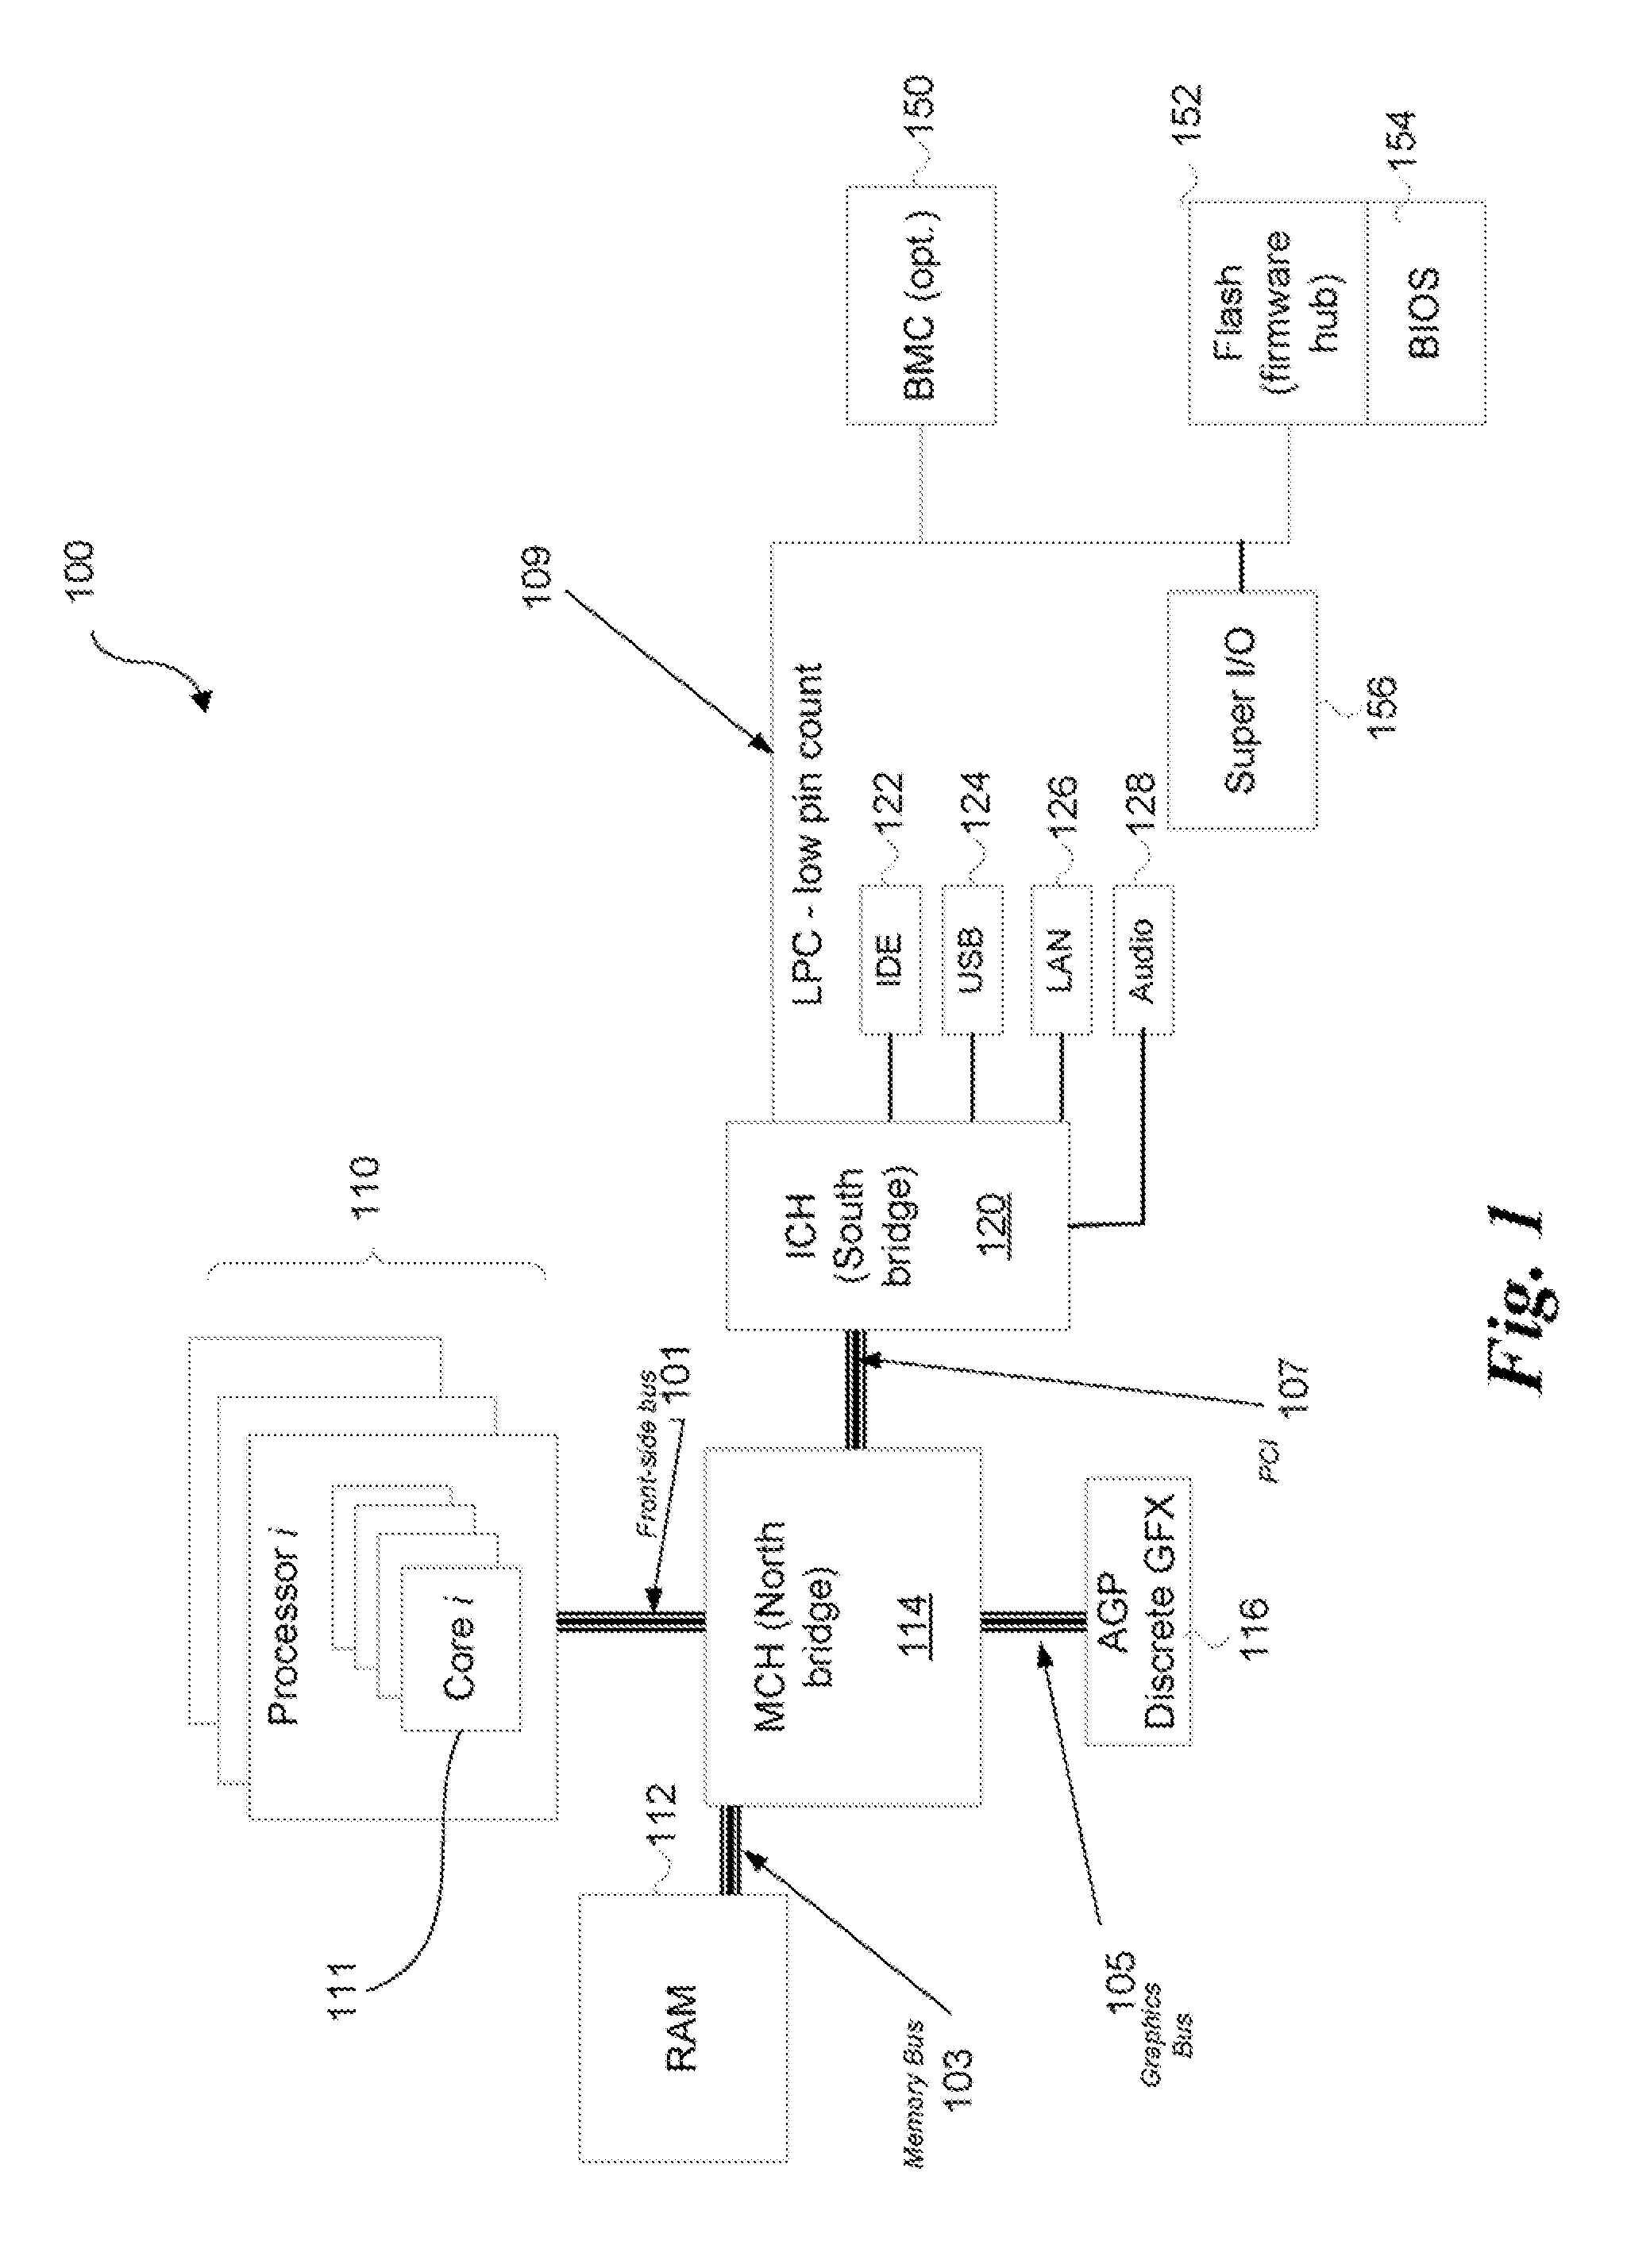 System and method to optimize OS scheduling decisions for power savings based on temporal characteristics of the scheduled entity and system workload